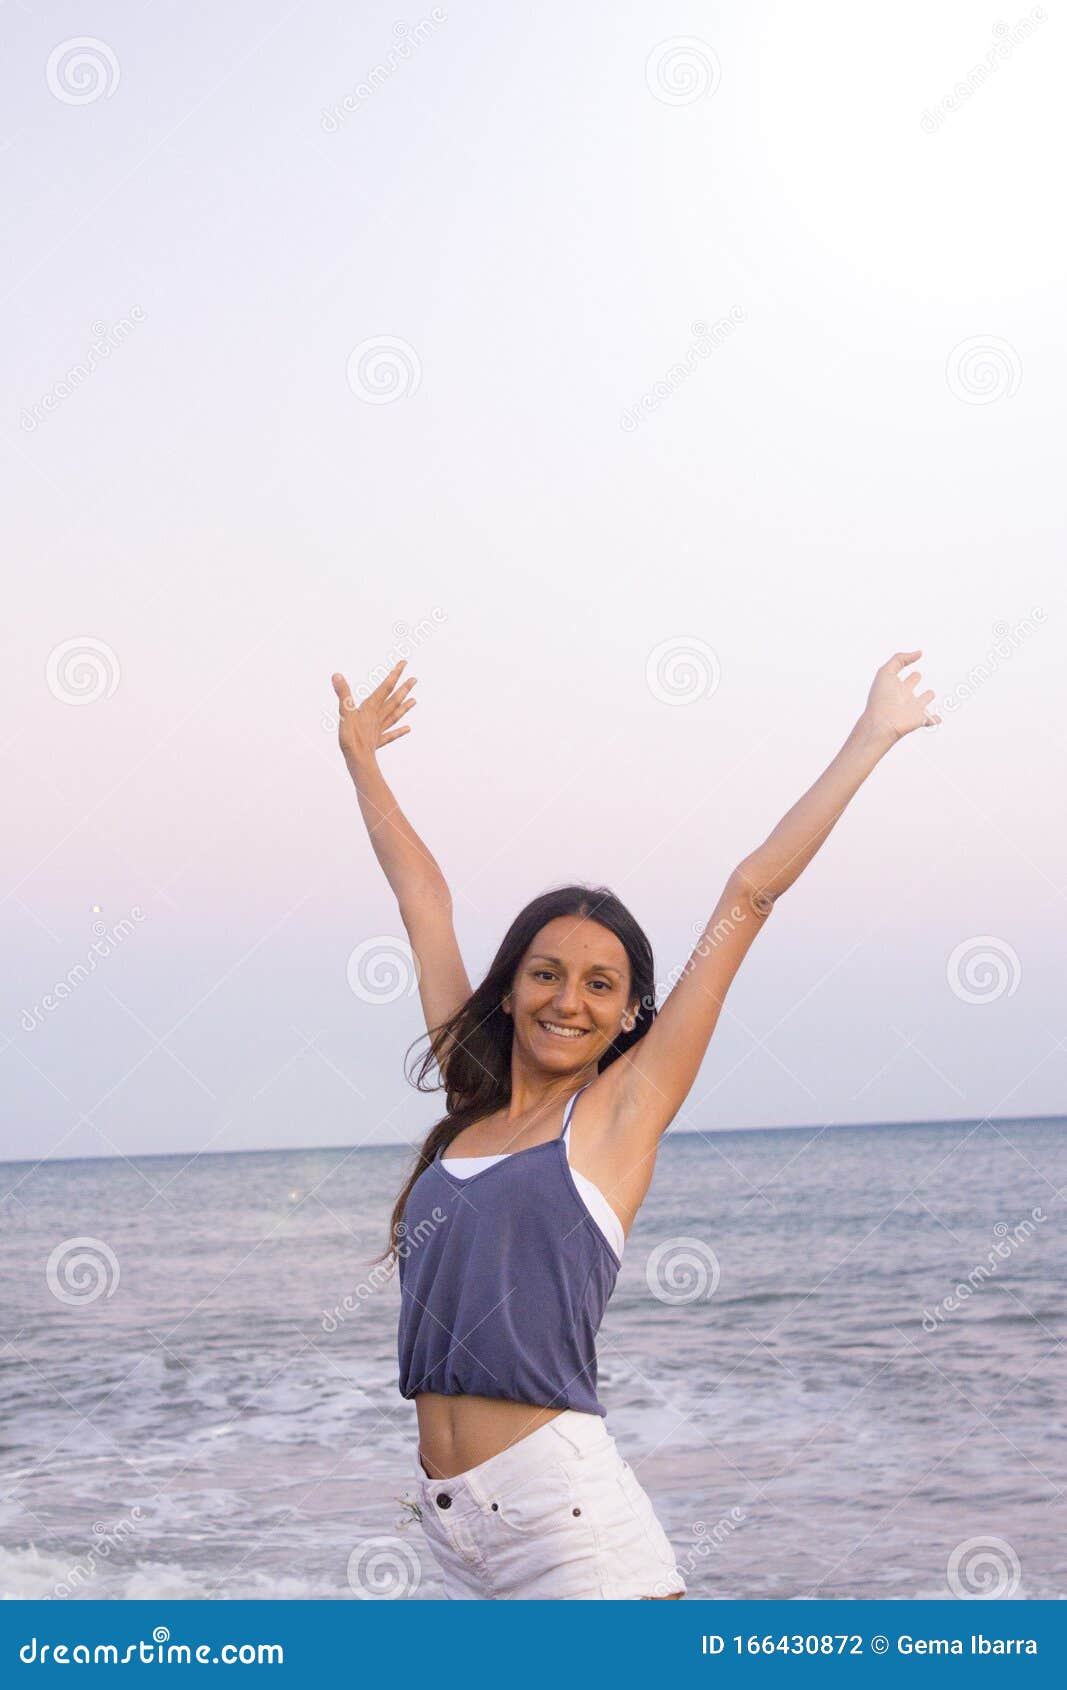 young woman on the beach in very positive and happy attitude